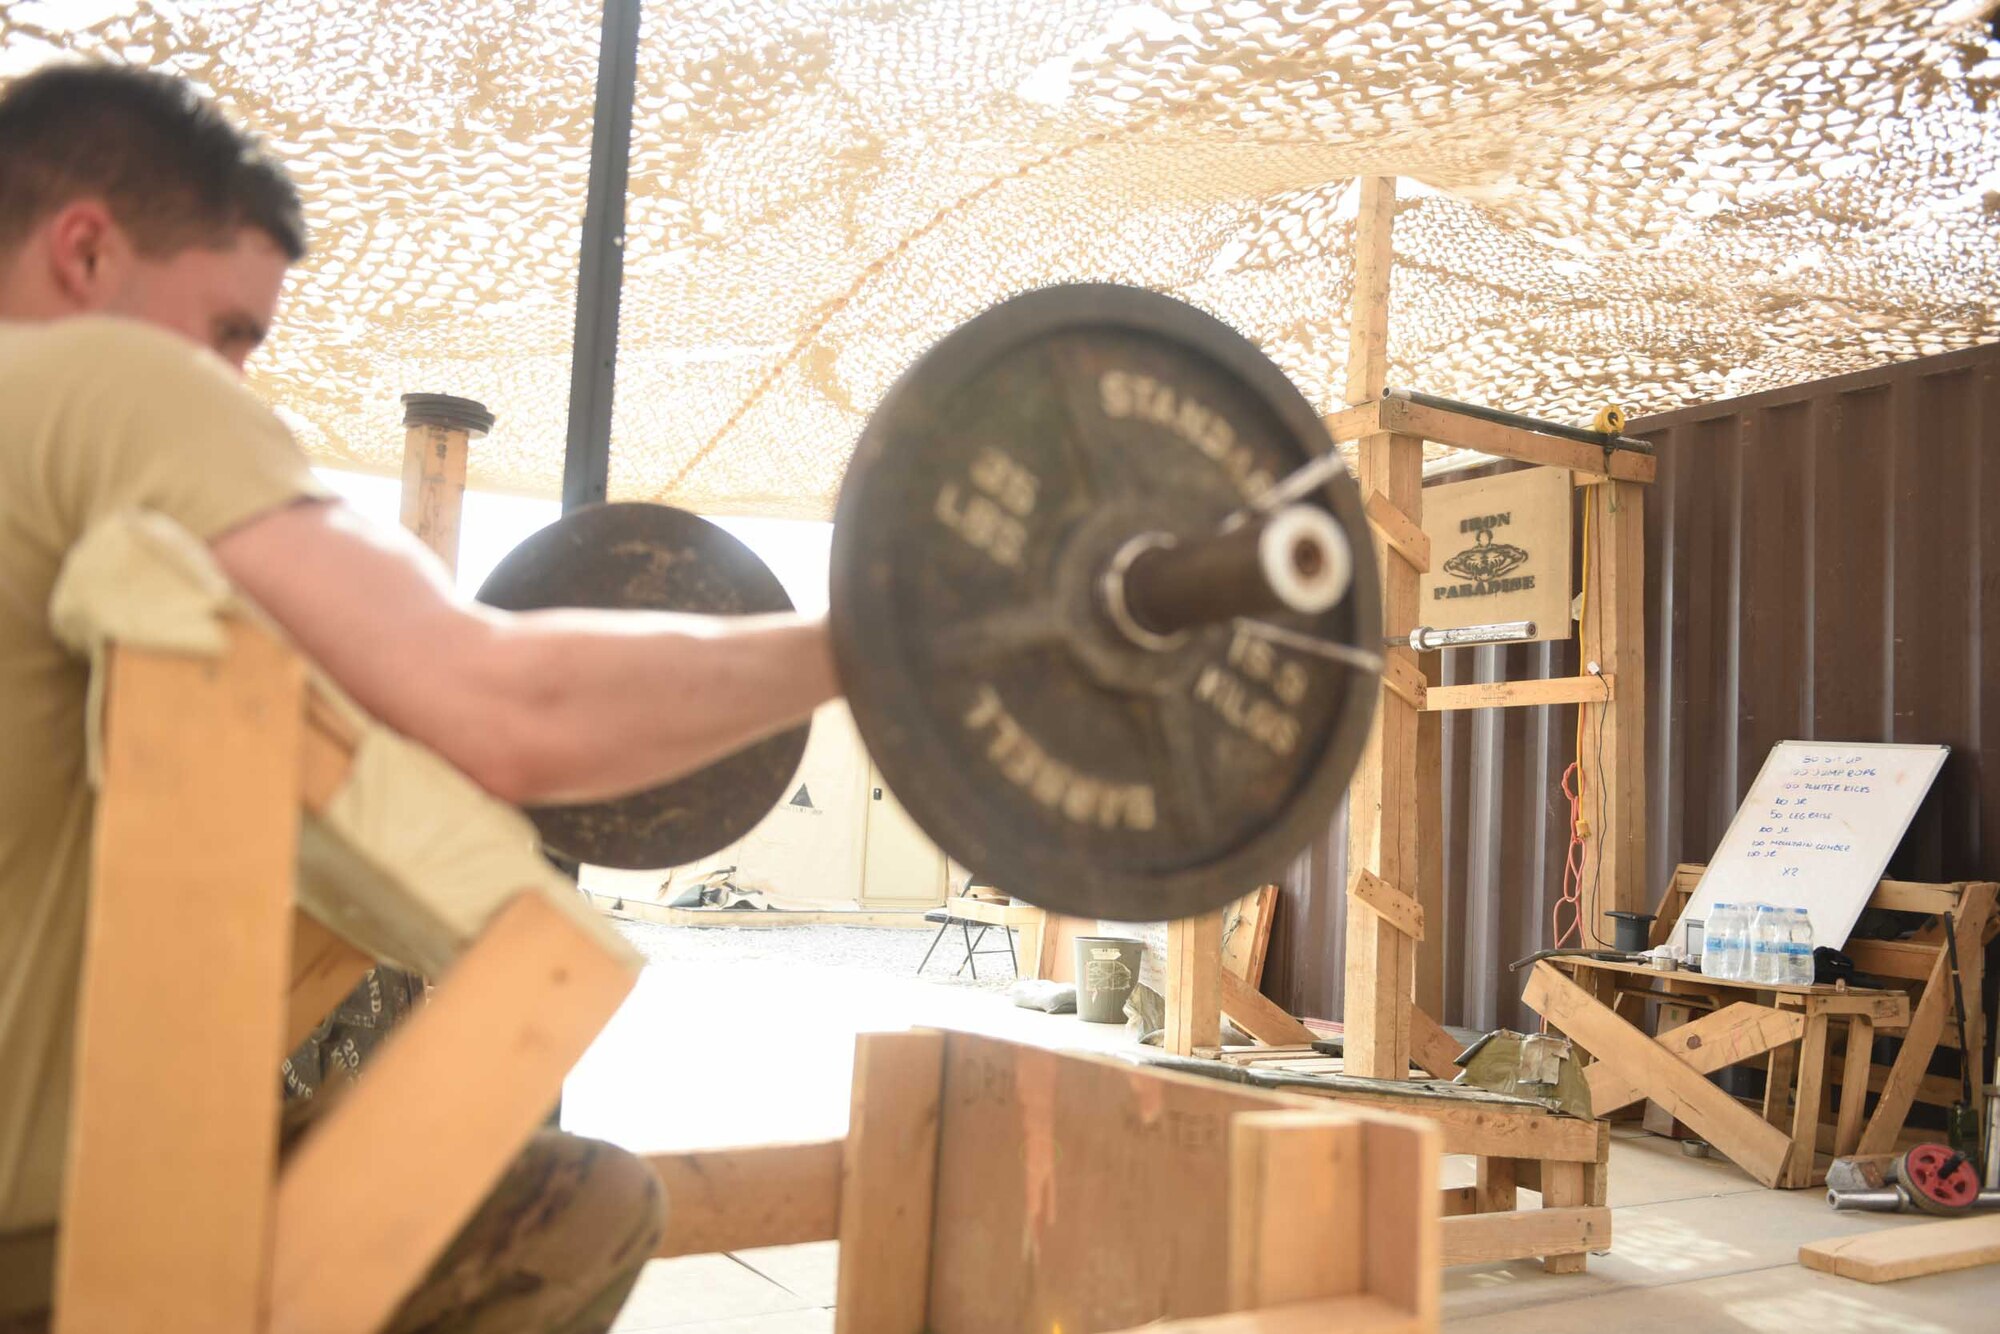 U.S. Air Force Senior Airman Justin Salisbery, an airfield management specialist deployed in support of Combined Joint Task Force – Operation Inherent Resolve and assigned to the 370th Air Expeditionary Advisory Group, Detachment 1, curls a barbell on a makeshift preacher curl bench in the 370th AEAG detachment’s “Iron Paradise” gym at Qayyarah West Airfield, Iraq, July 2, 2017. The air advisors built the “Iron Paradise” gym, which includes a makeshift squat rack, bench press, preacher curl bench and other recently acquired weights, creating an area often filled with U.S. Air Force and Army personnel trying to maintain physical fitness in their austere location. CJTF-OIR is the global Coalition to defeat ISIS in Iraq and Syria.   (U.S. Air Force photo by Tech. Sgt. Jonathan Hehnly)